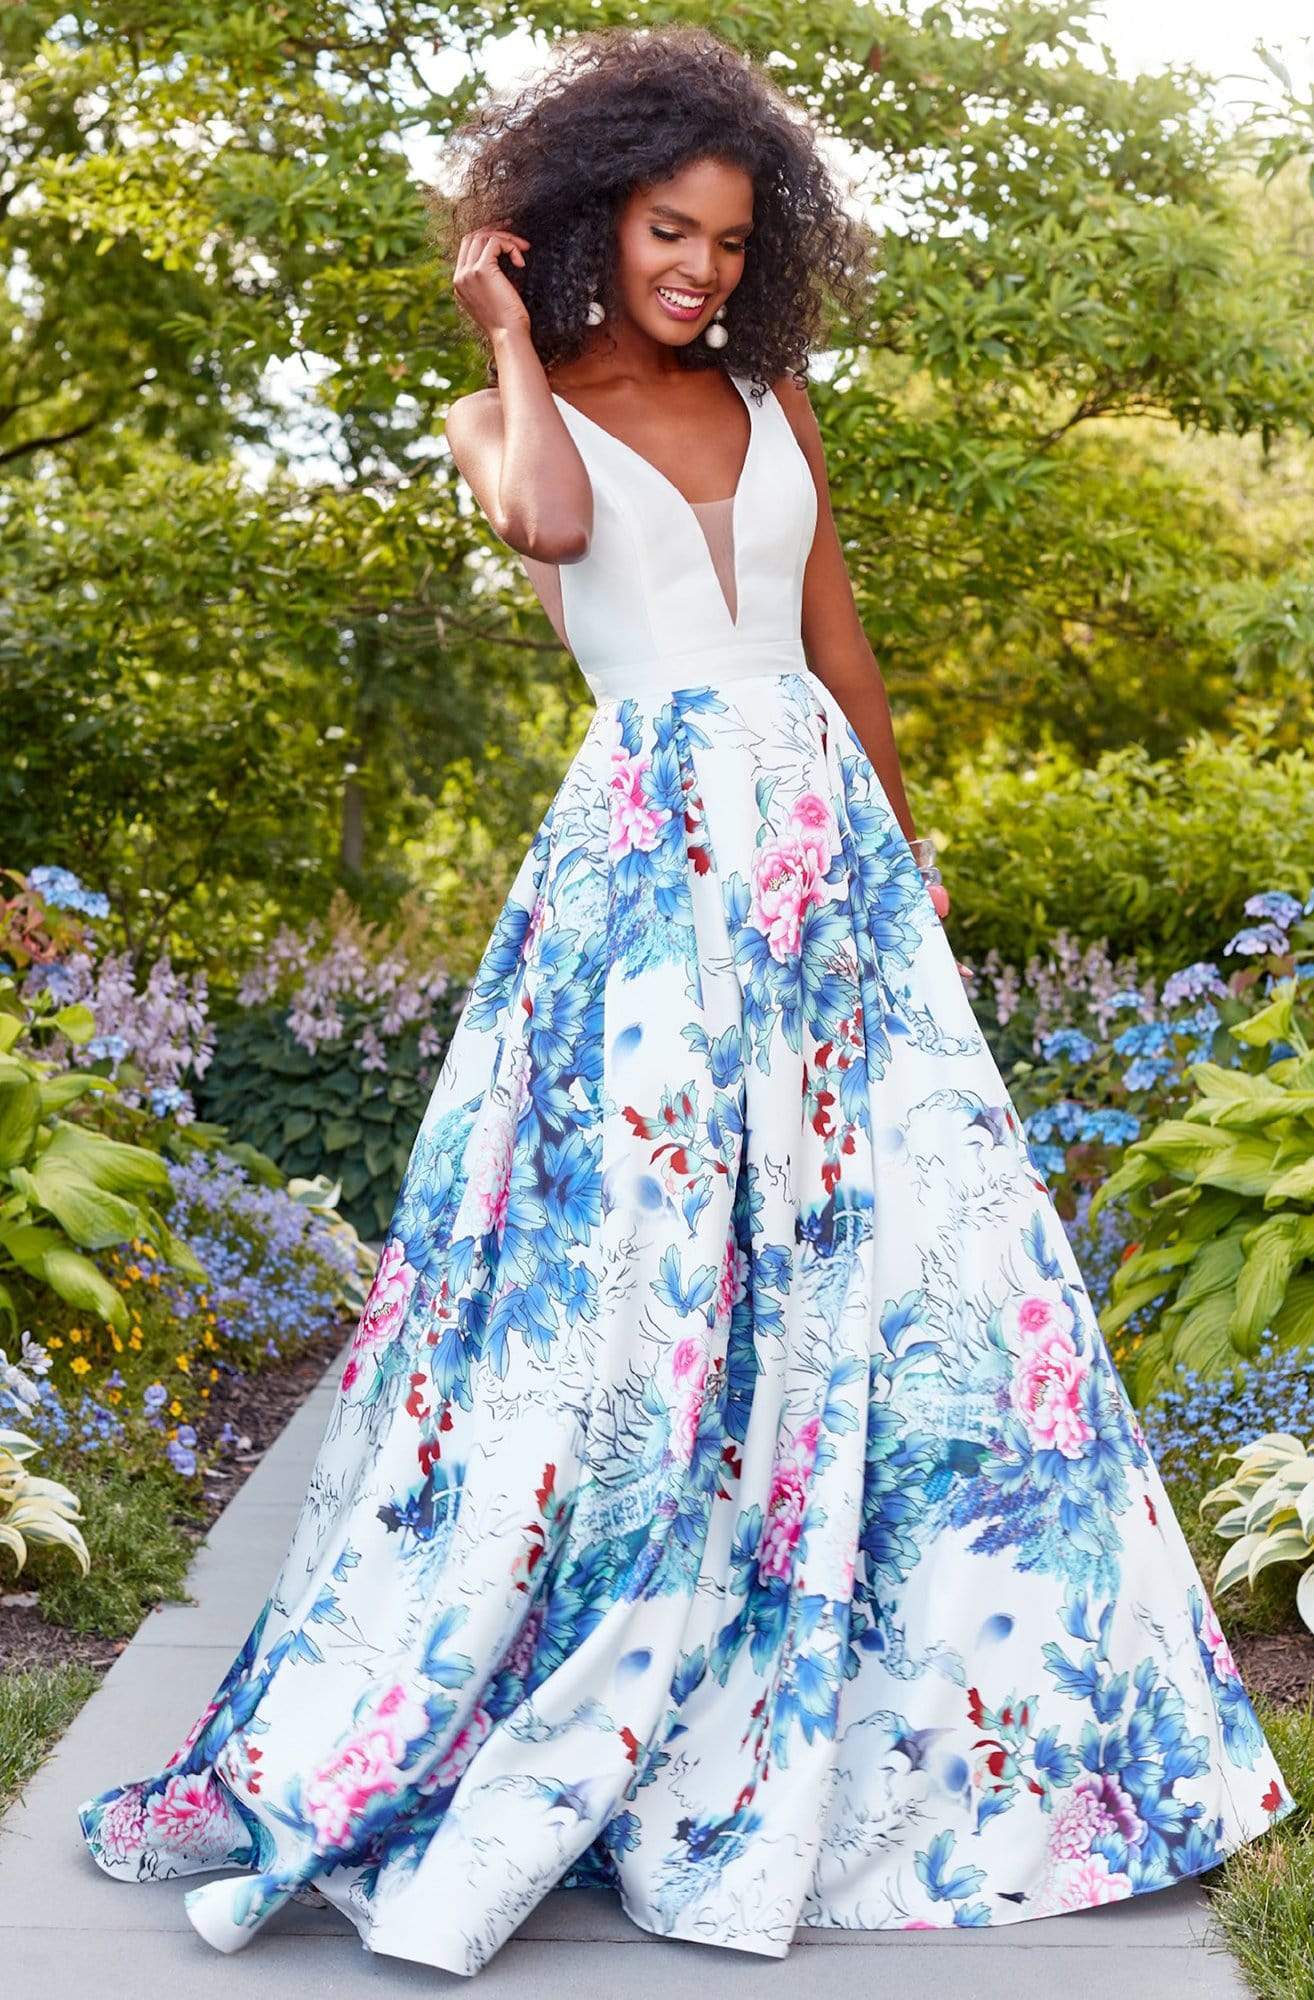 Light Sky Blue Floral Appliqued Blue Floral Prom Dress With Deep V Neck And  Sleeveless Design 2017 Floor Length Formal Party Gown For Celebrity Evenings  From Xzy1984316, $166.21 | DHgate.Com